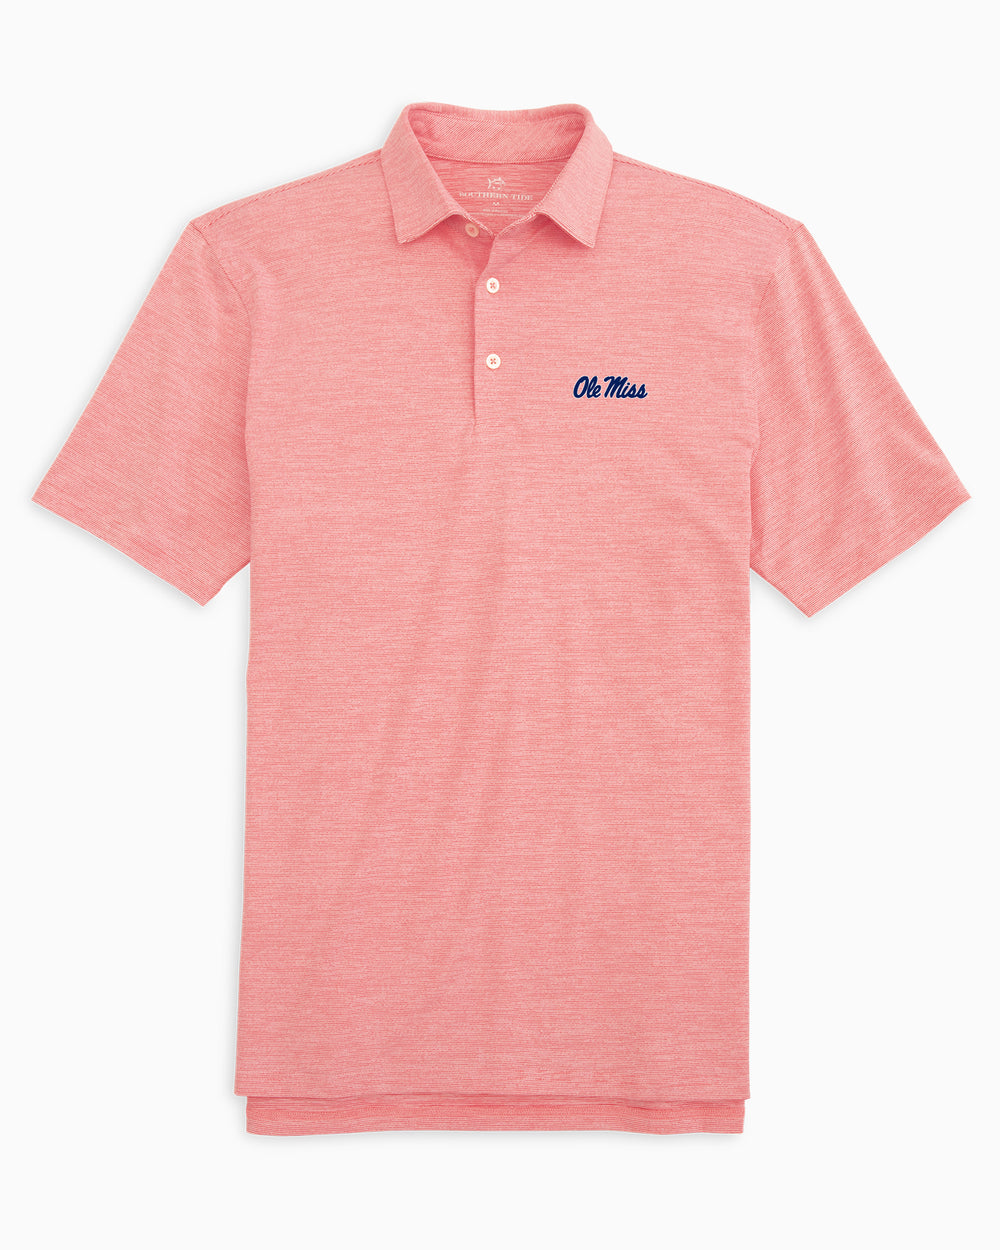 The front of the Ole Miss Driver Spacedye Polo Shirt by Southern Tide - Varsity Red